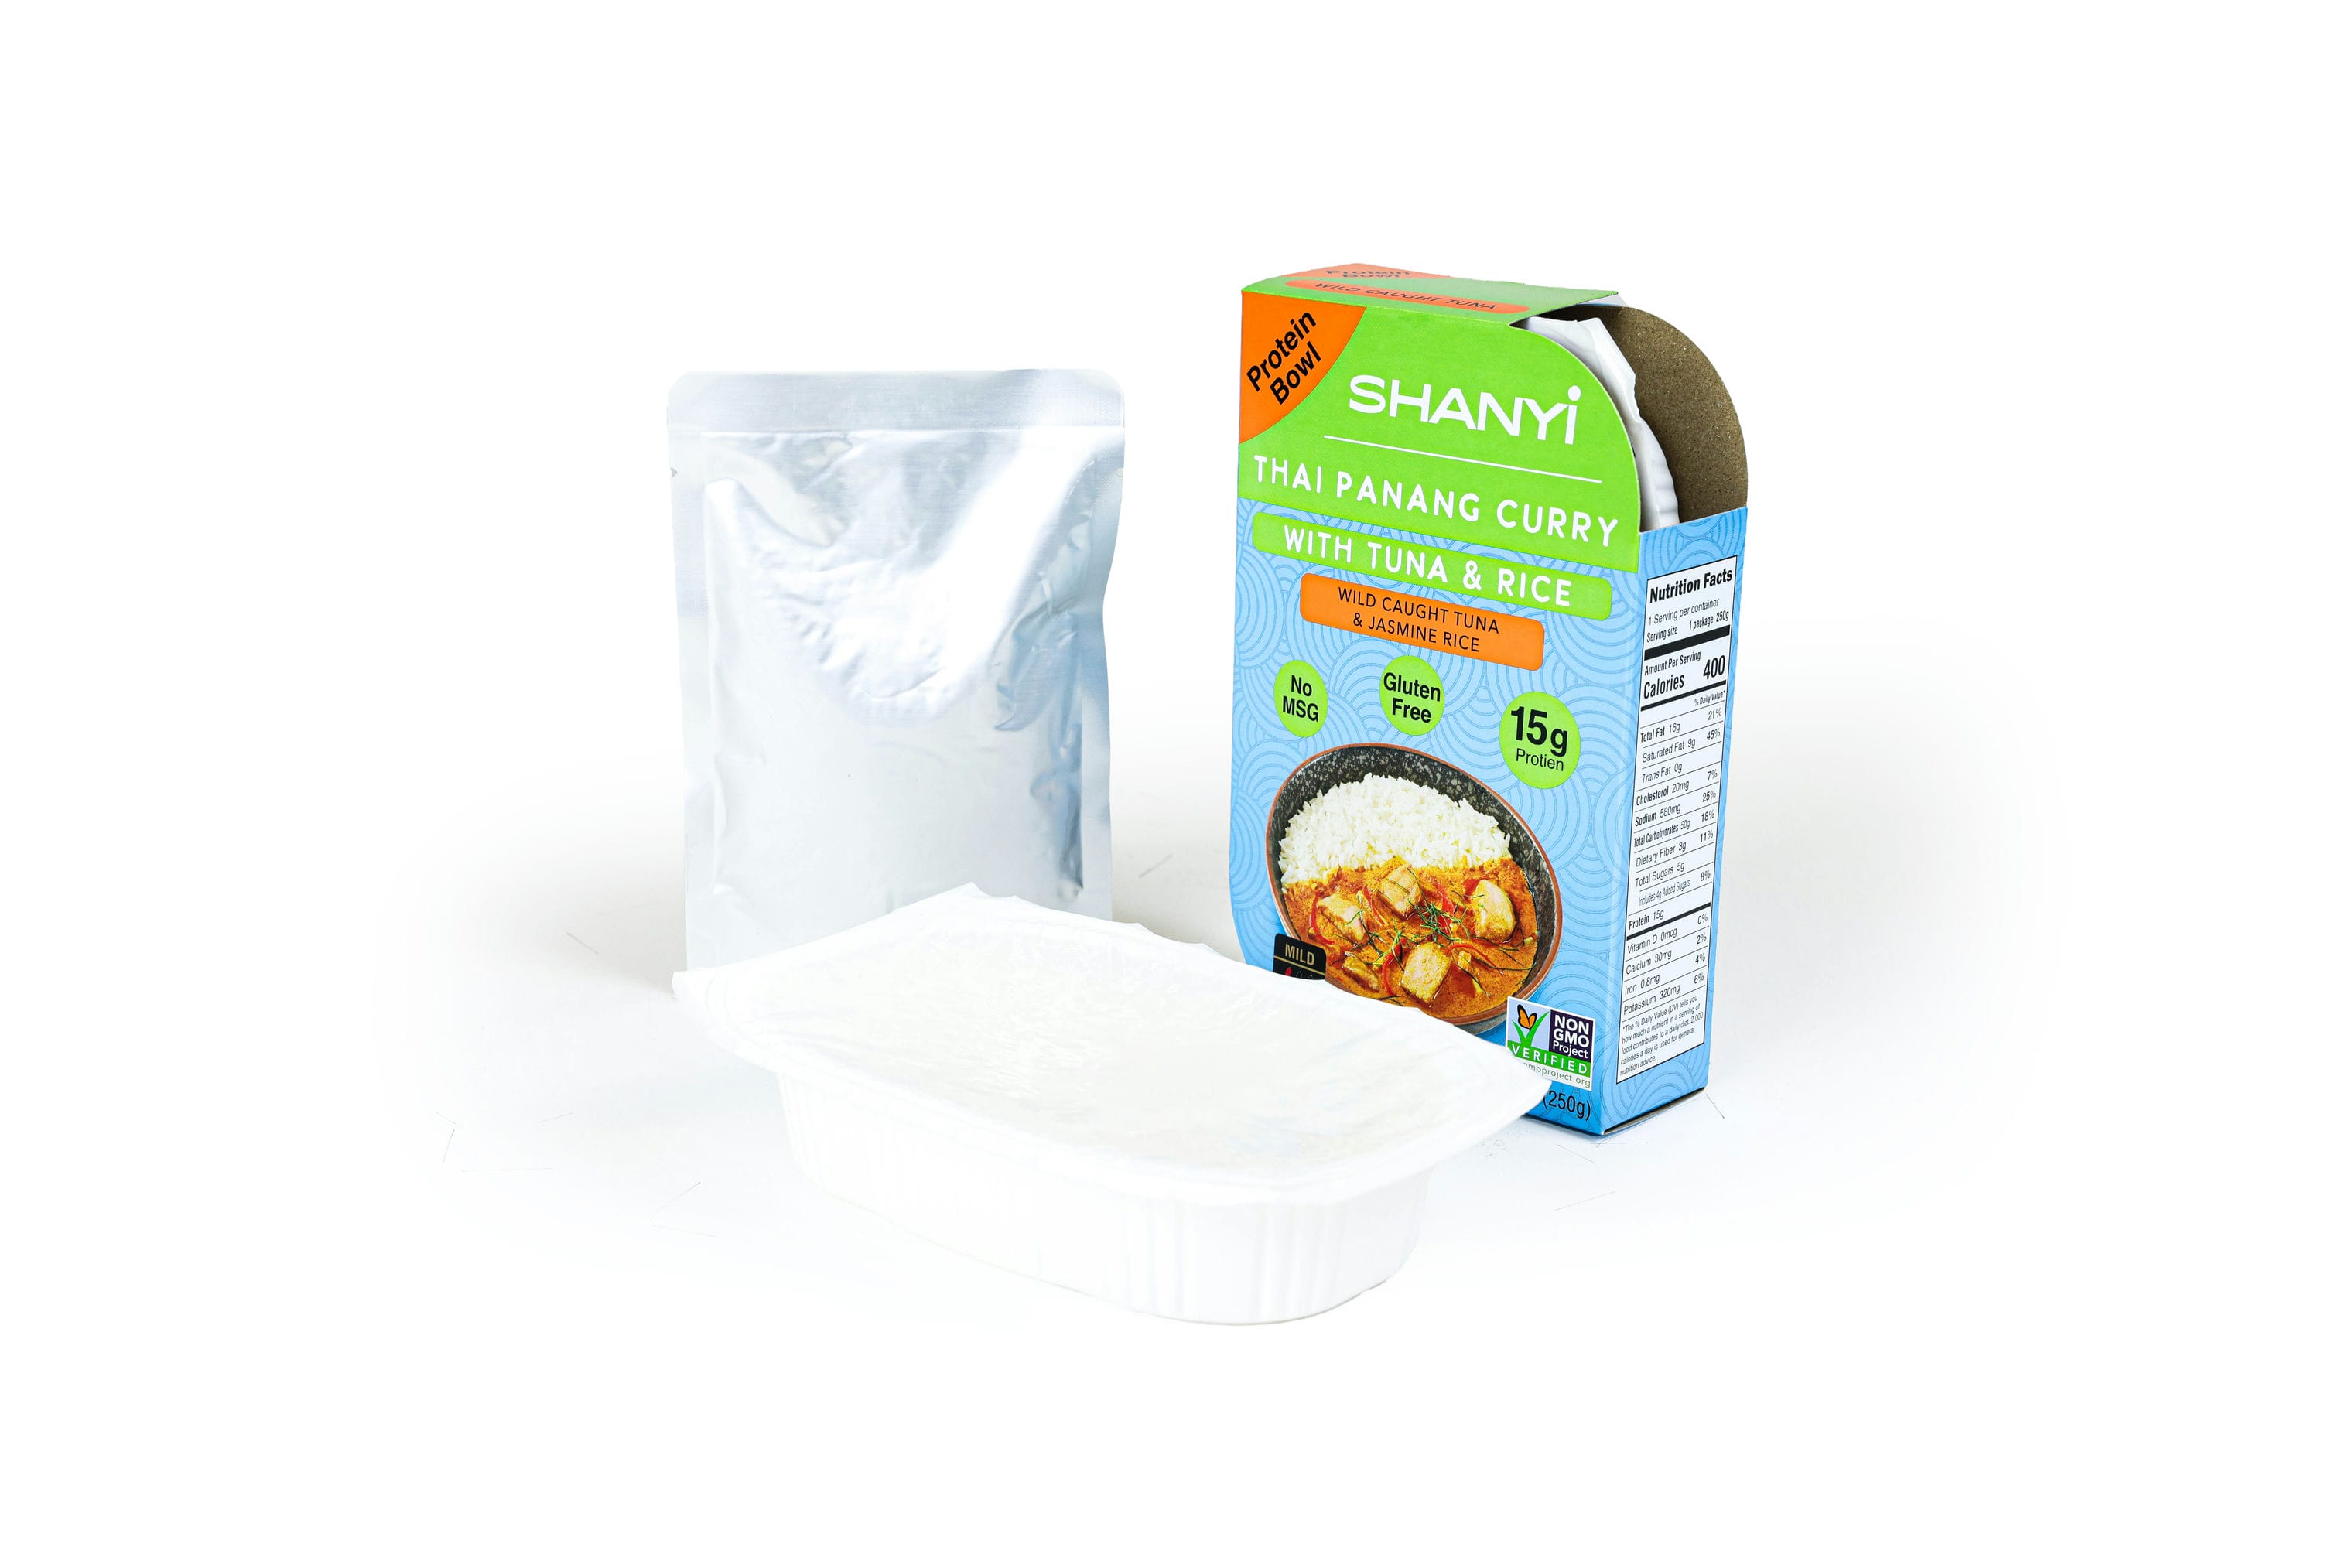 ShanYi Instant Microwave Meals Ready to Eat, 250g/8.8oz, Thai Panang Curry with Tuna and Jasmine Rice, Case of 6